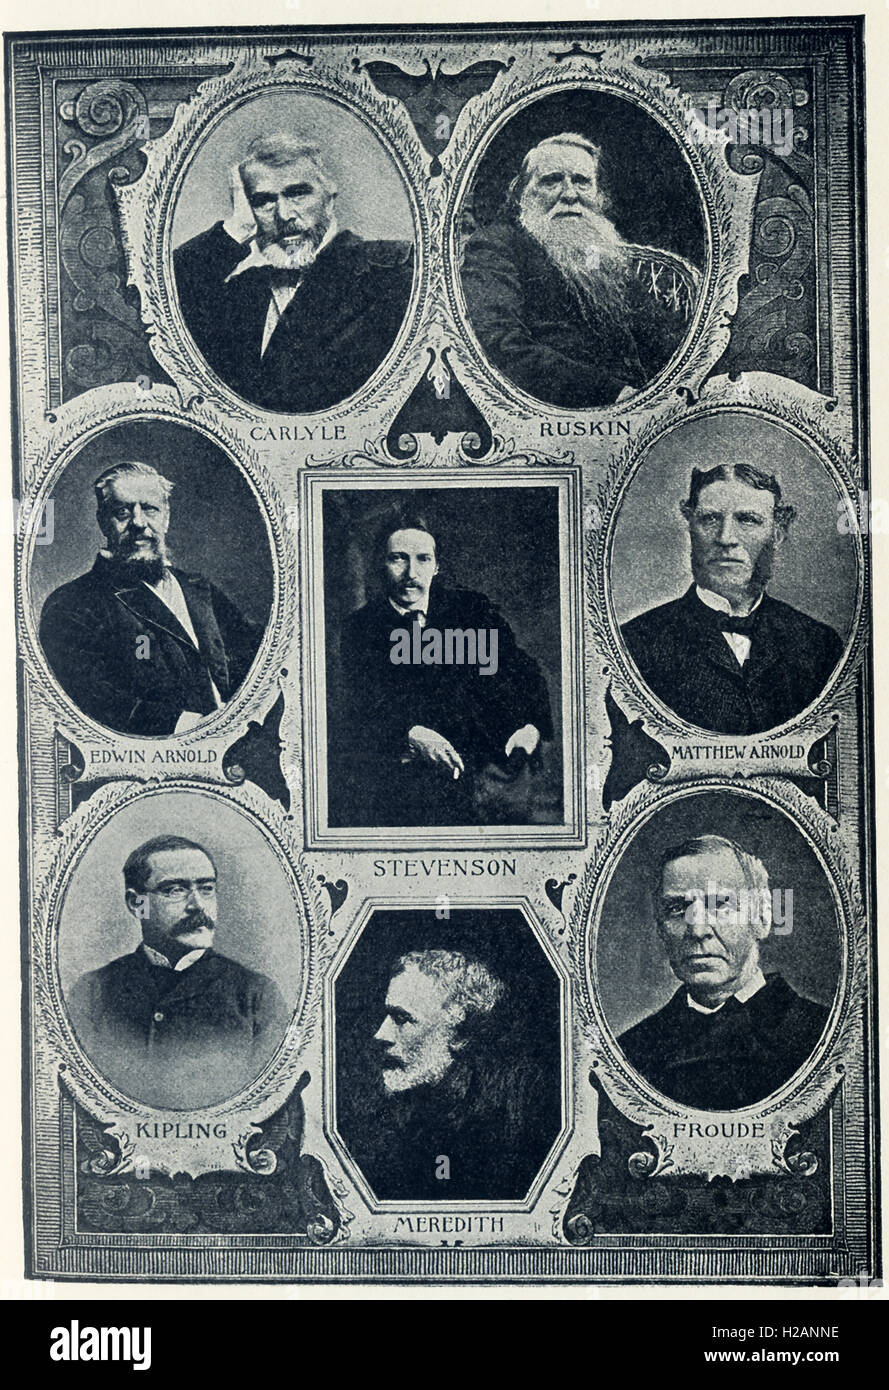 The English authors pictured here are, from left to right, top to bottom: Thomas Carlyle (1795-1881), John Ruskin (1819-1900), Edwin Arnold (1832-1904), Robert Louis Stevenson (1850-1894), Matthew Arnold (1822-1888), Rudyard Kipling (1865-1936), George Meredith (1828-1909), and James Anthony Froude (1818-1894). Stock Photo